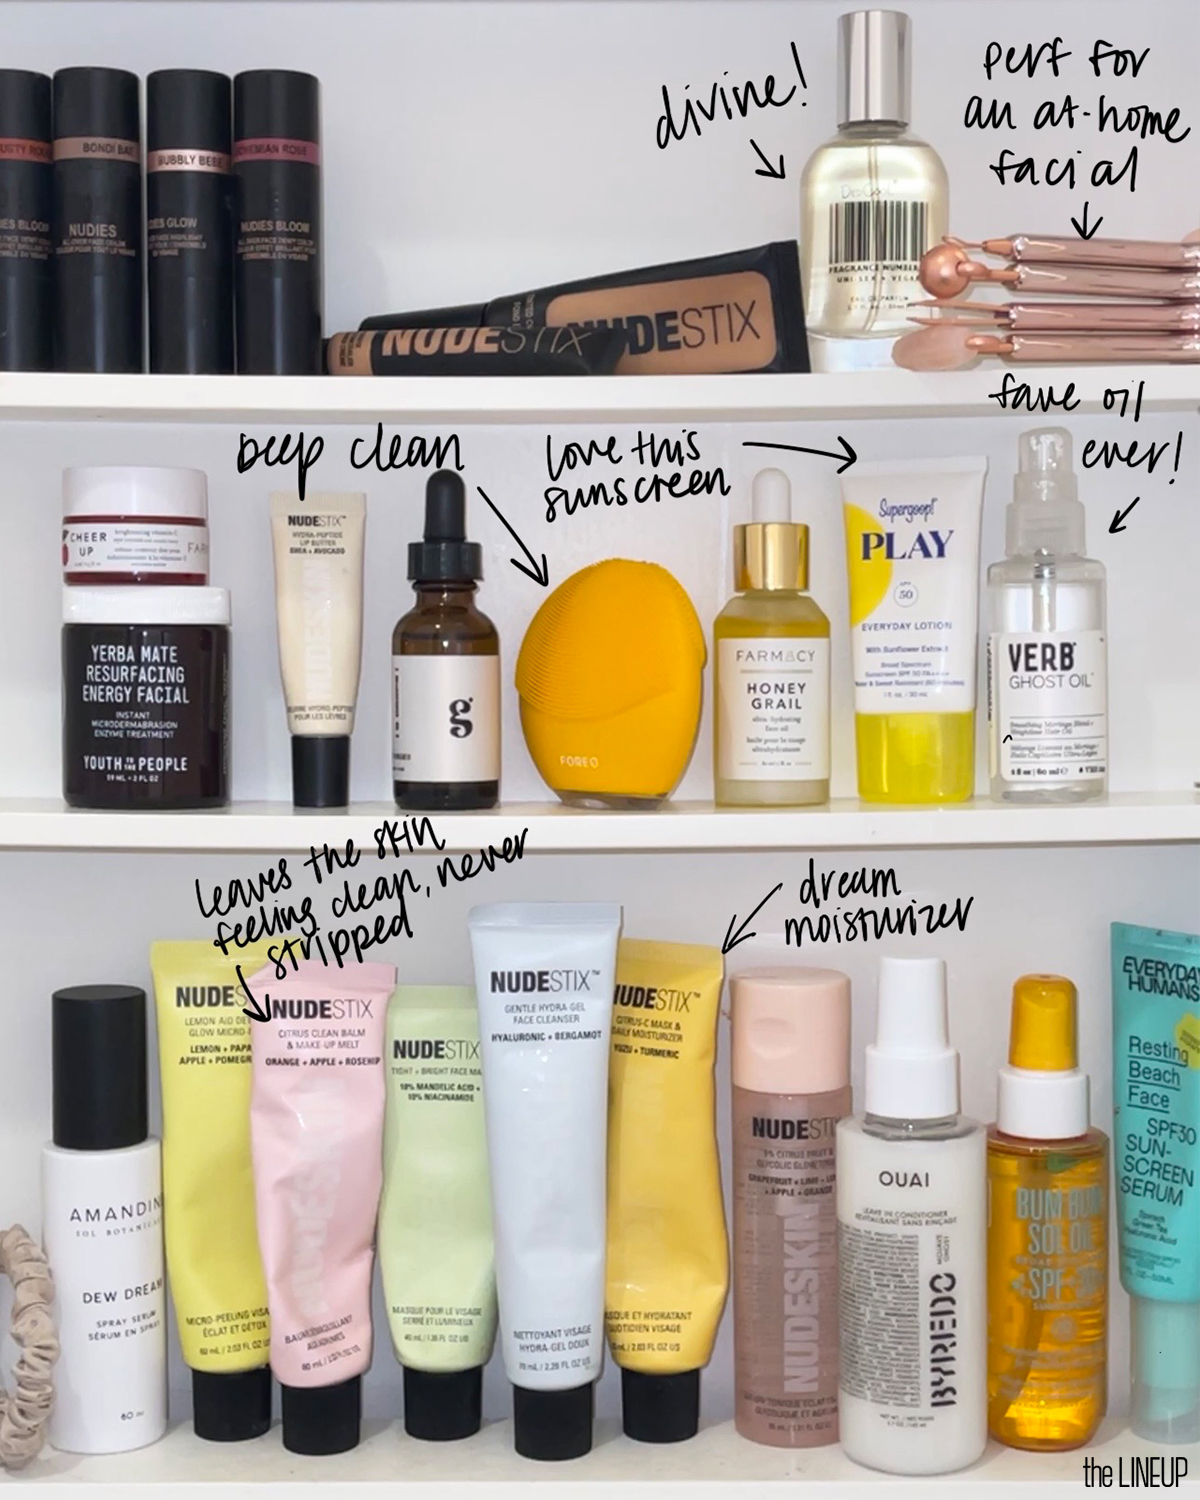 Taylor Frankel's go-to beauty products